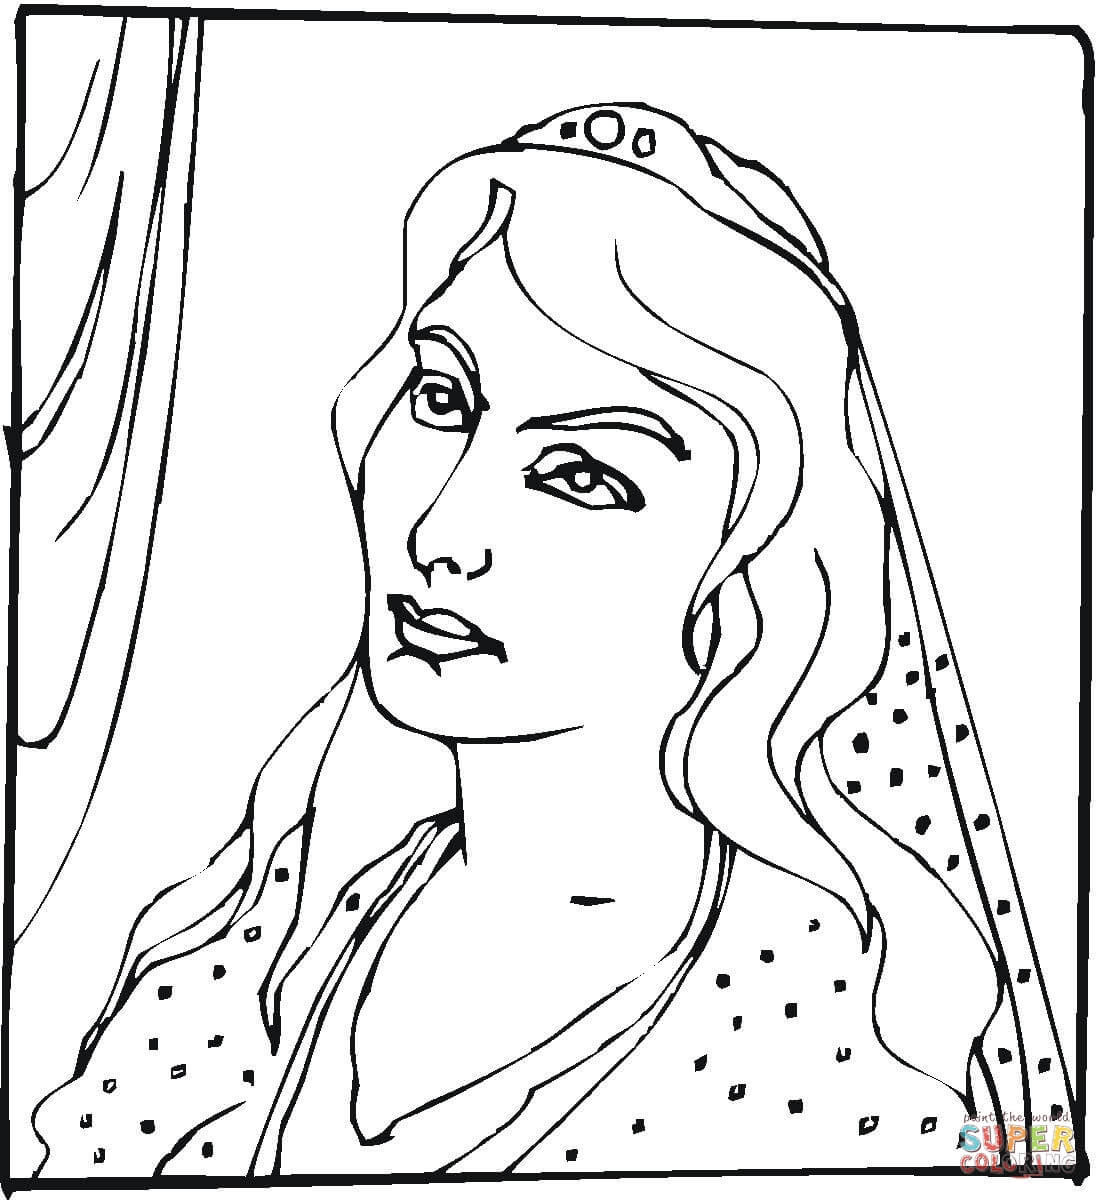 Queen esther coloring page free printable coloring pages